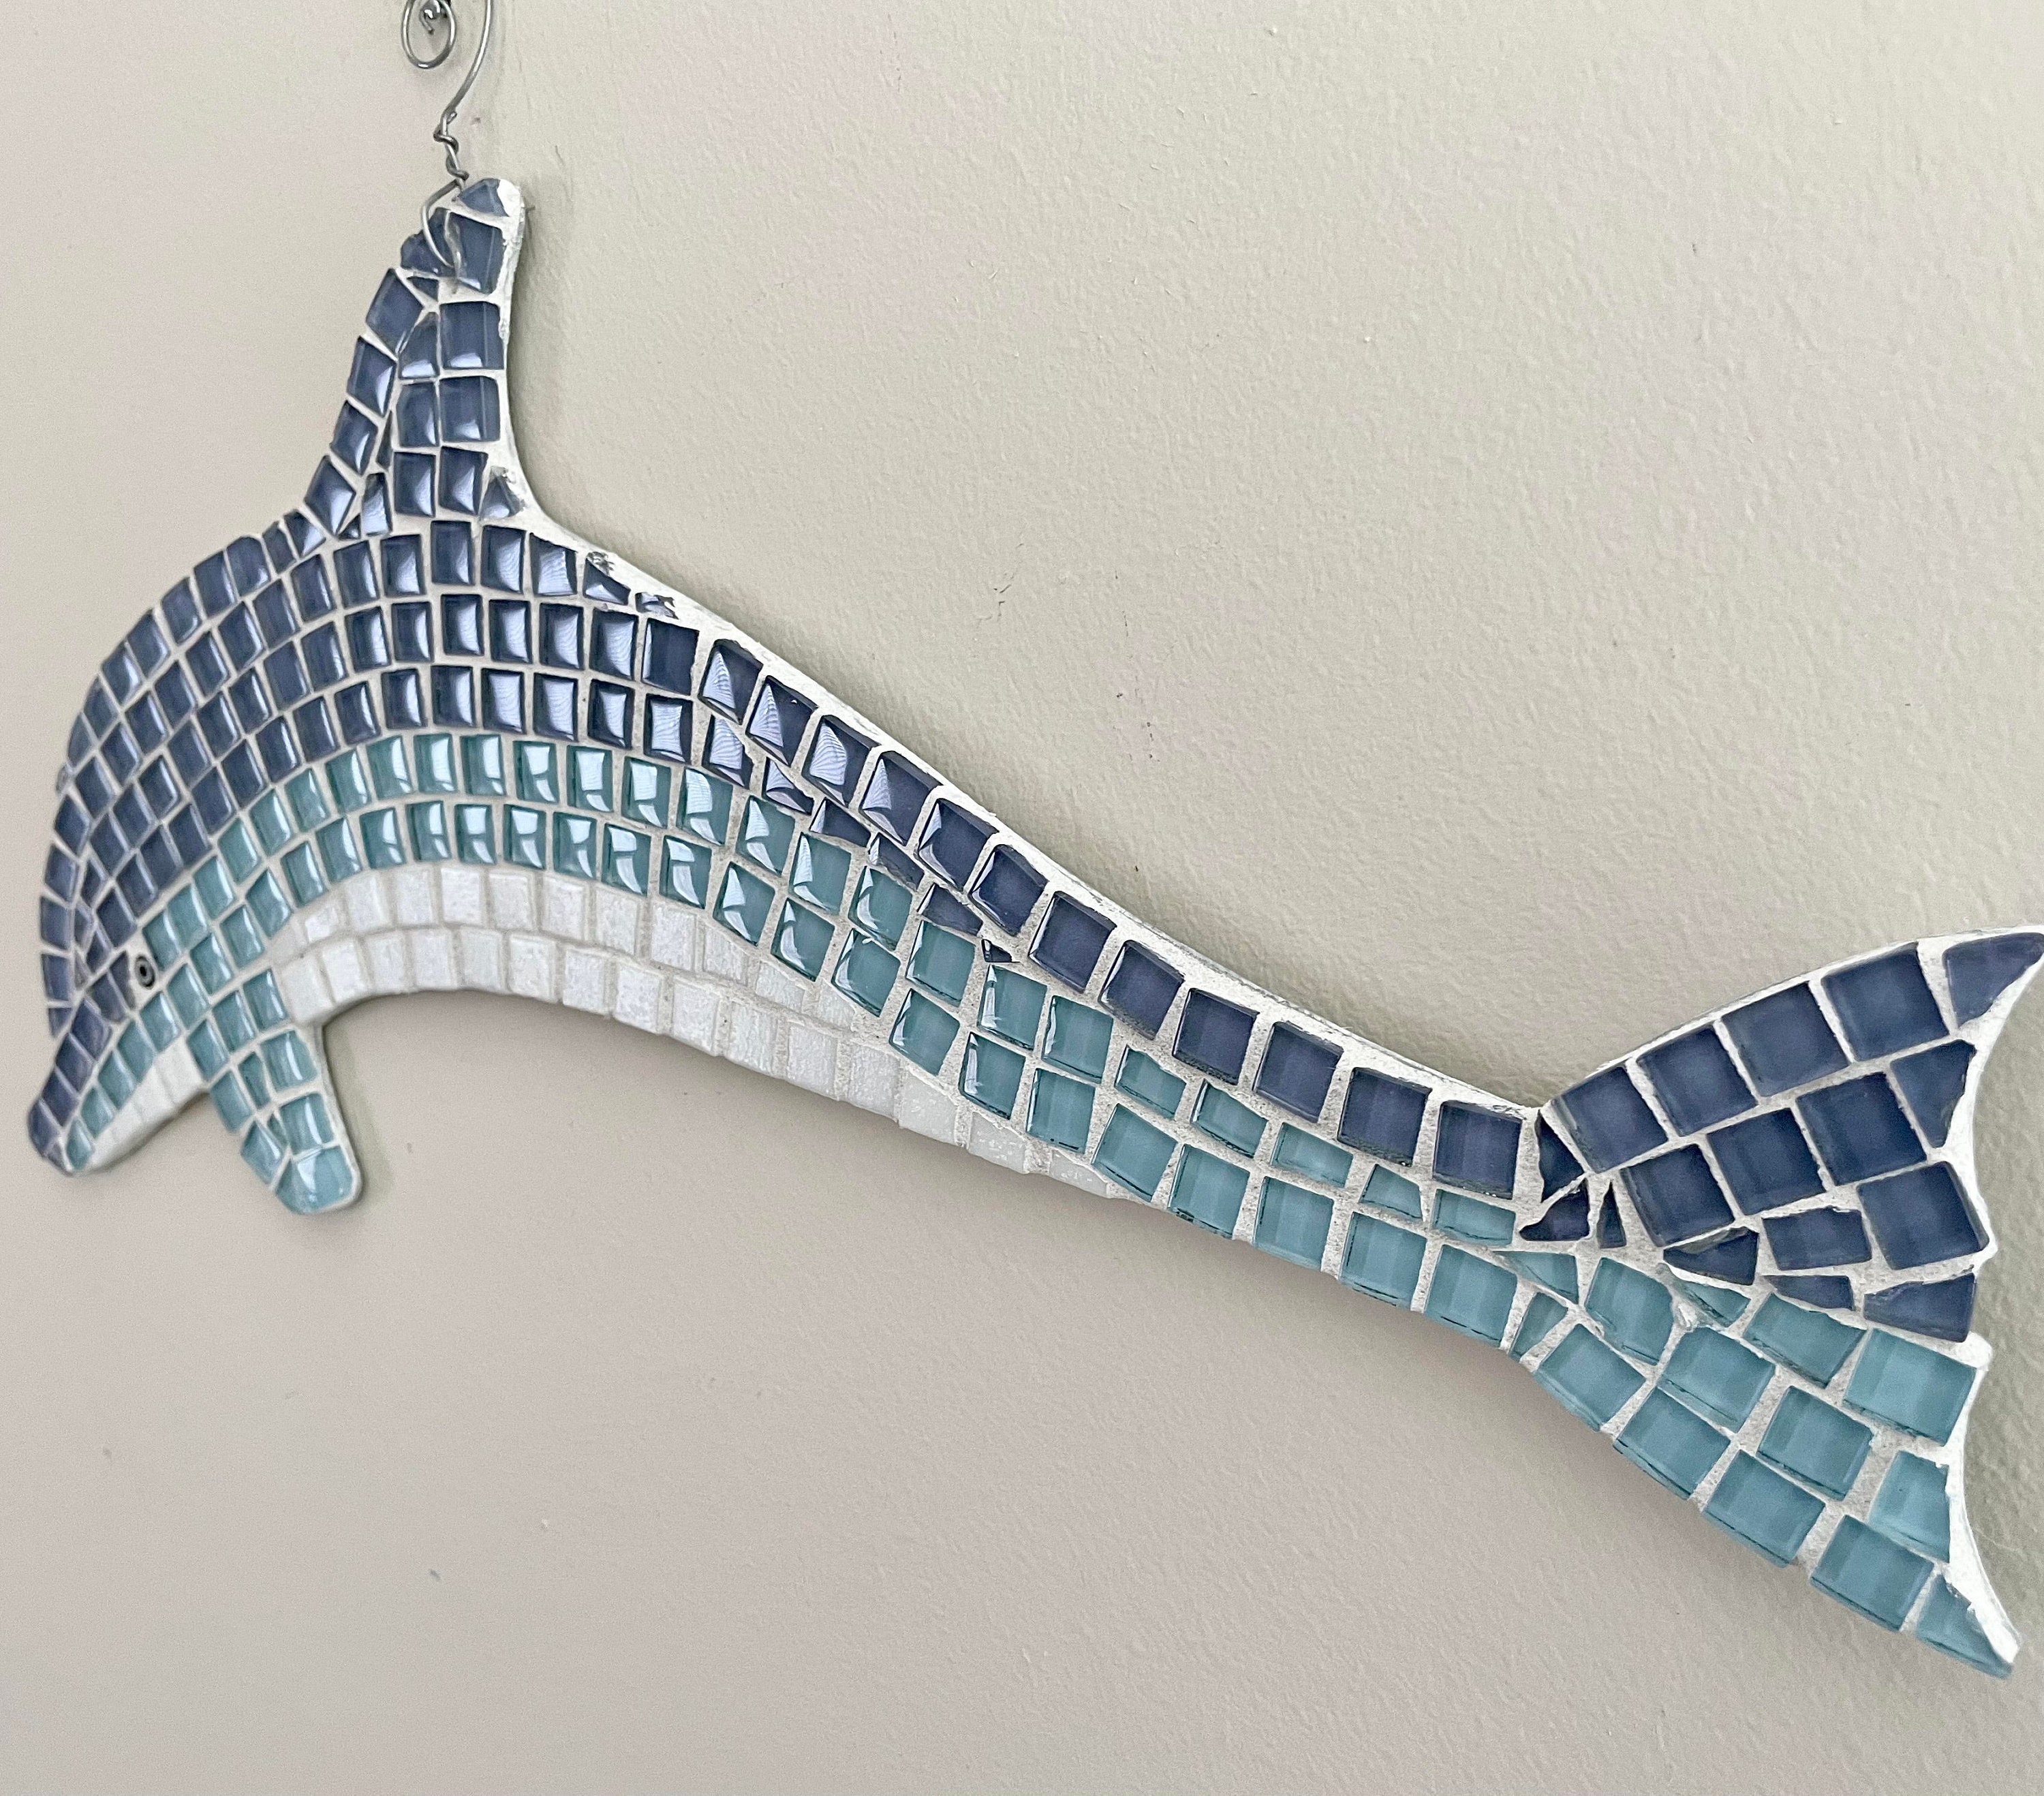 Dolphin Bay Blue and White Mixed Glass Mosaic Tile